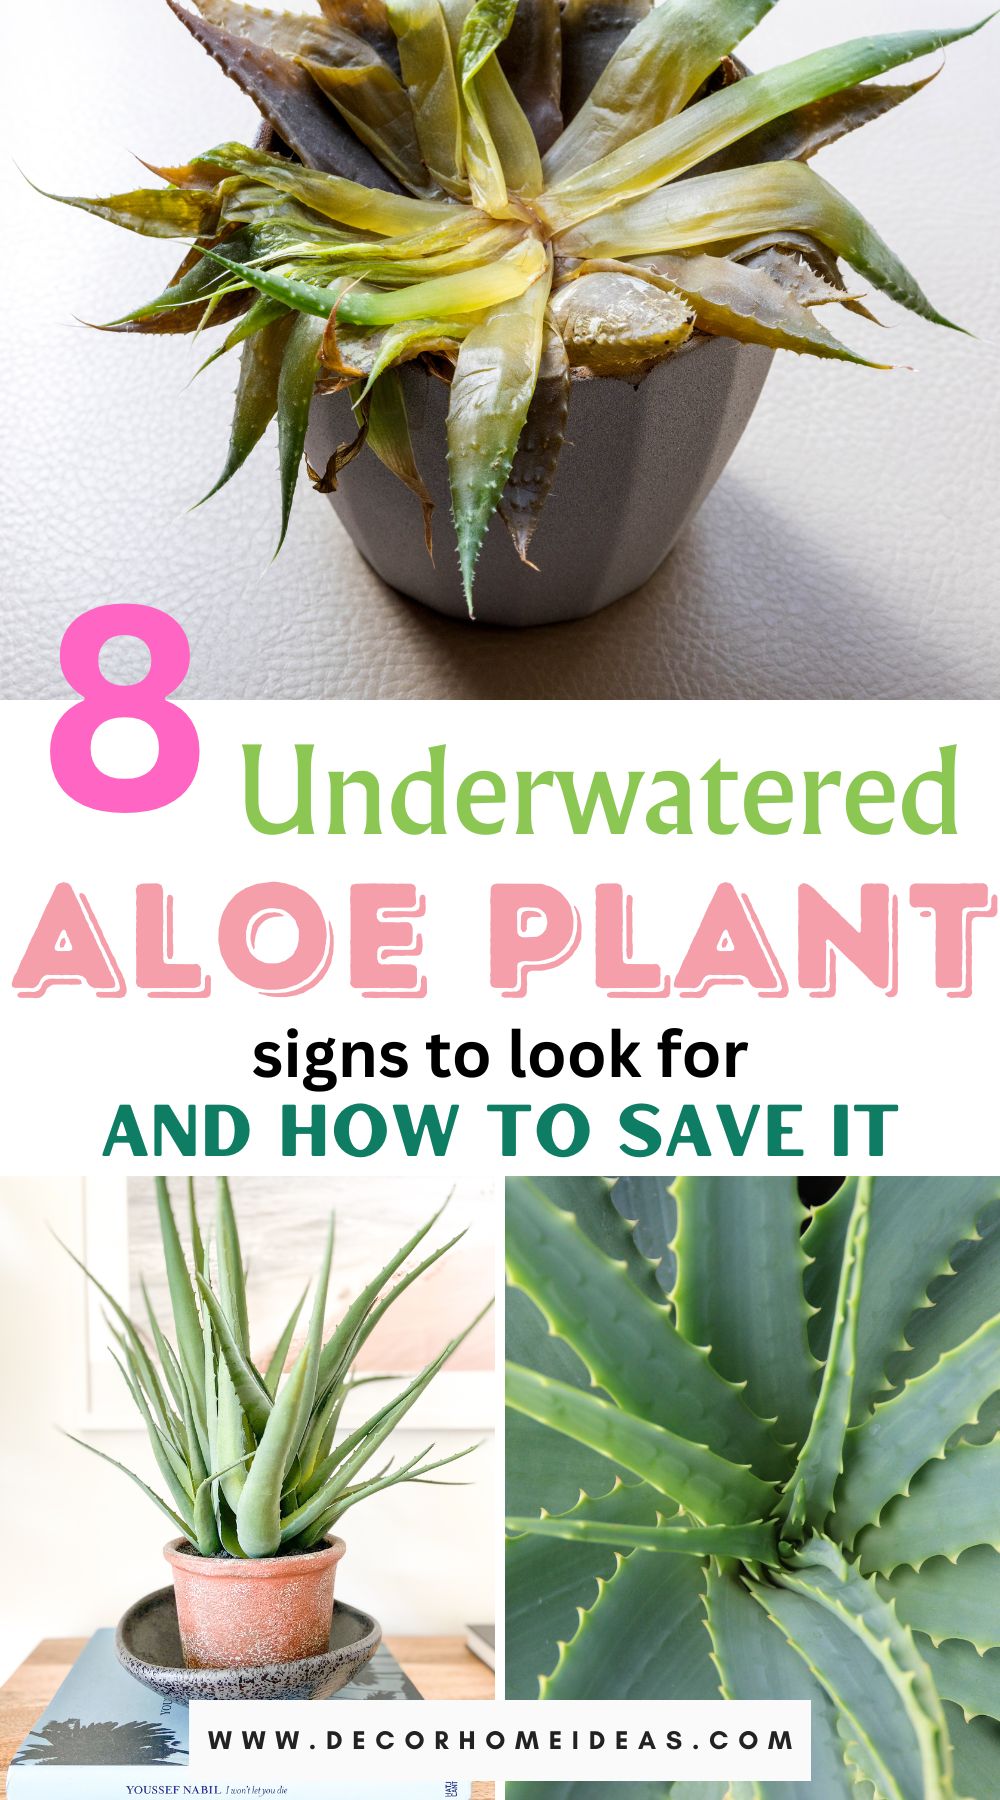 Recognize the telltale signs of an underwatered aloe plant and take action to rescue it with our expert advice. Discover 8 common indicators of dehydration and learn effective techniques to restore your aloe to its lush and vibrant self.